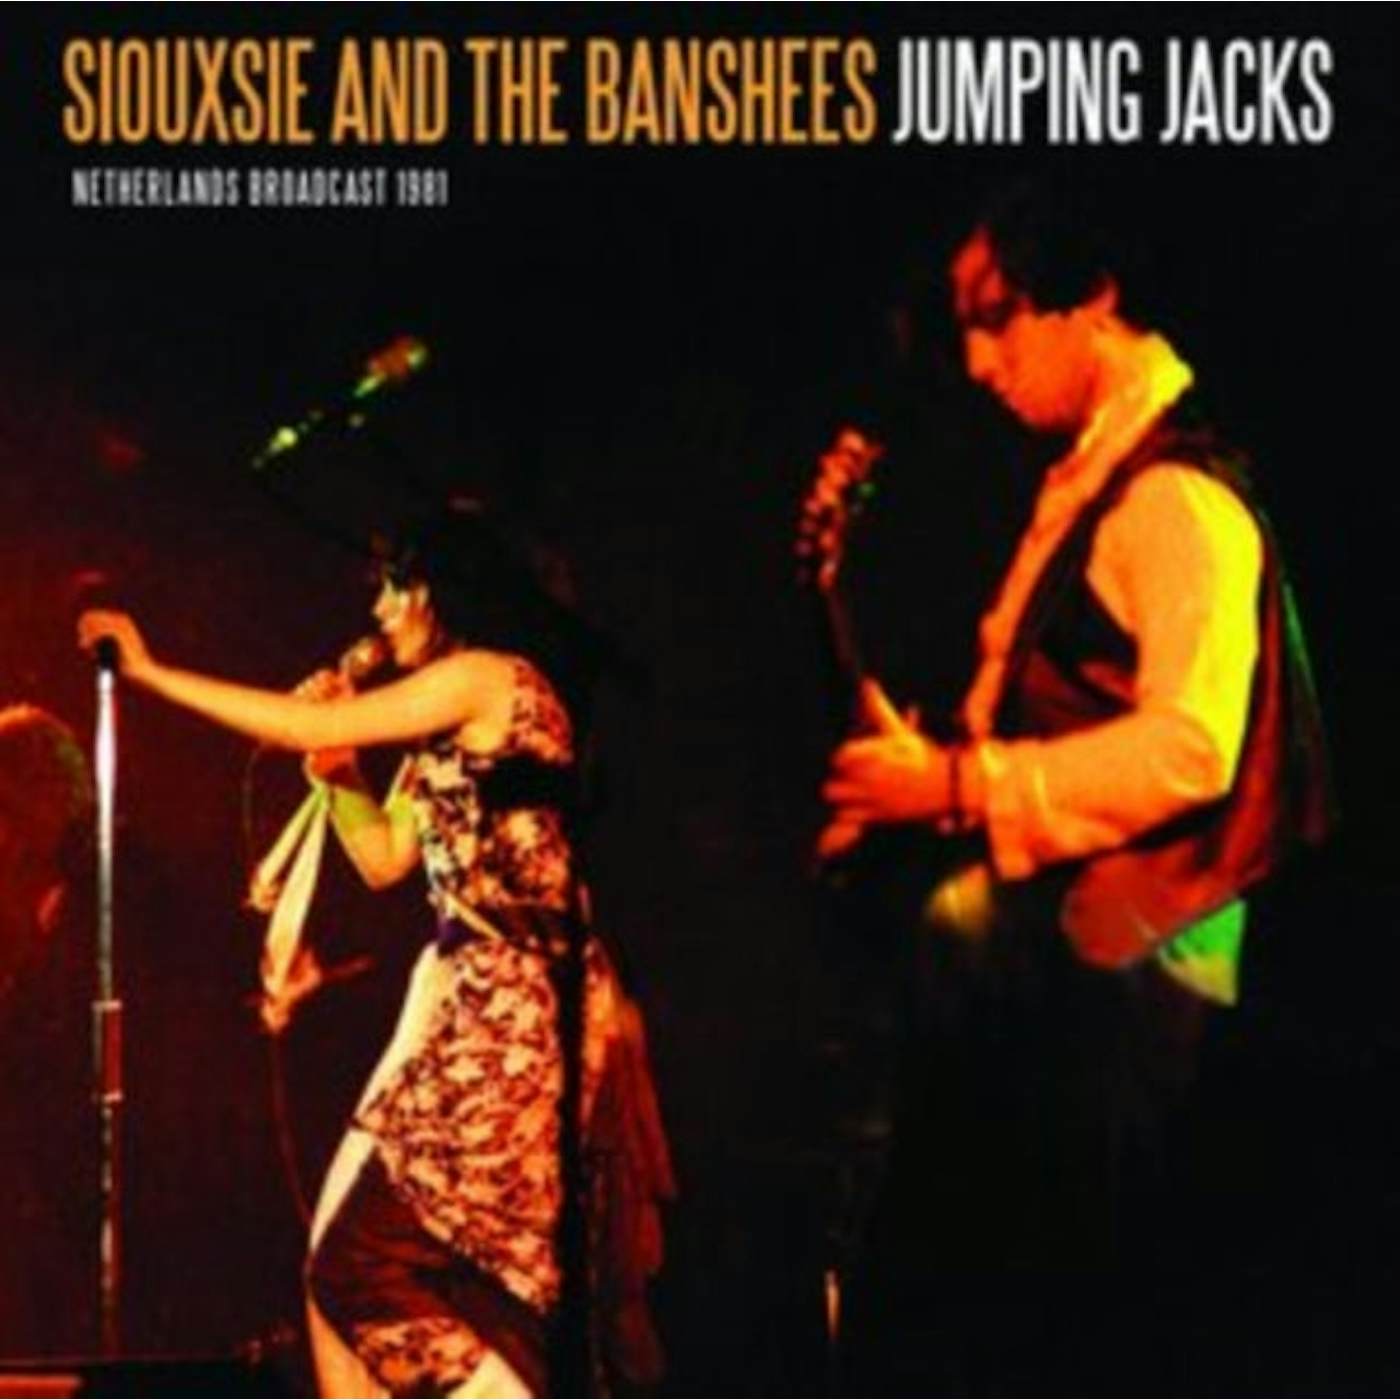 Siouxsie and the Banshees CD - Jumping Jacks